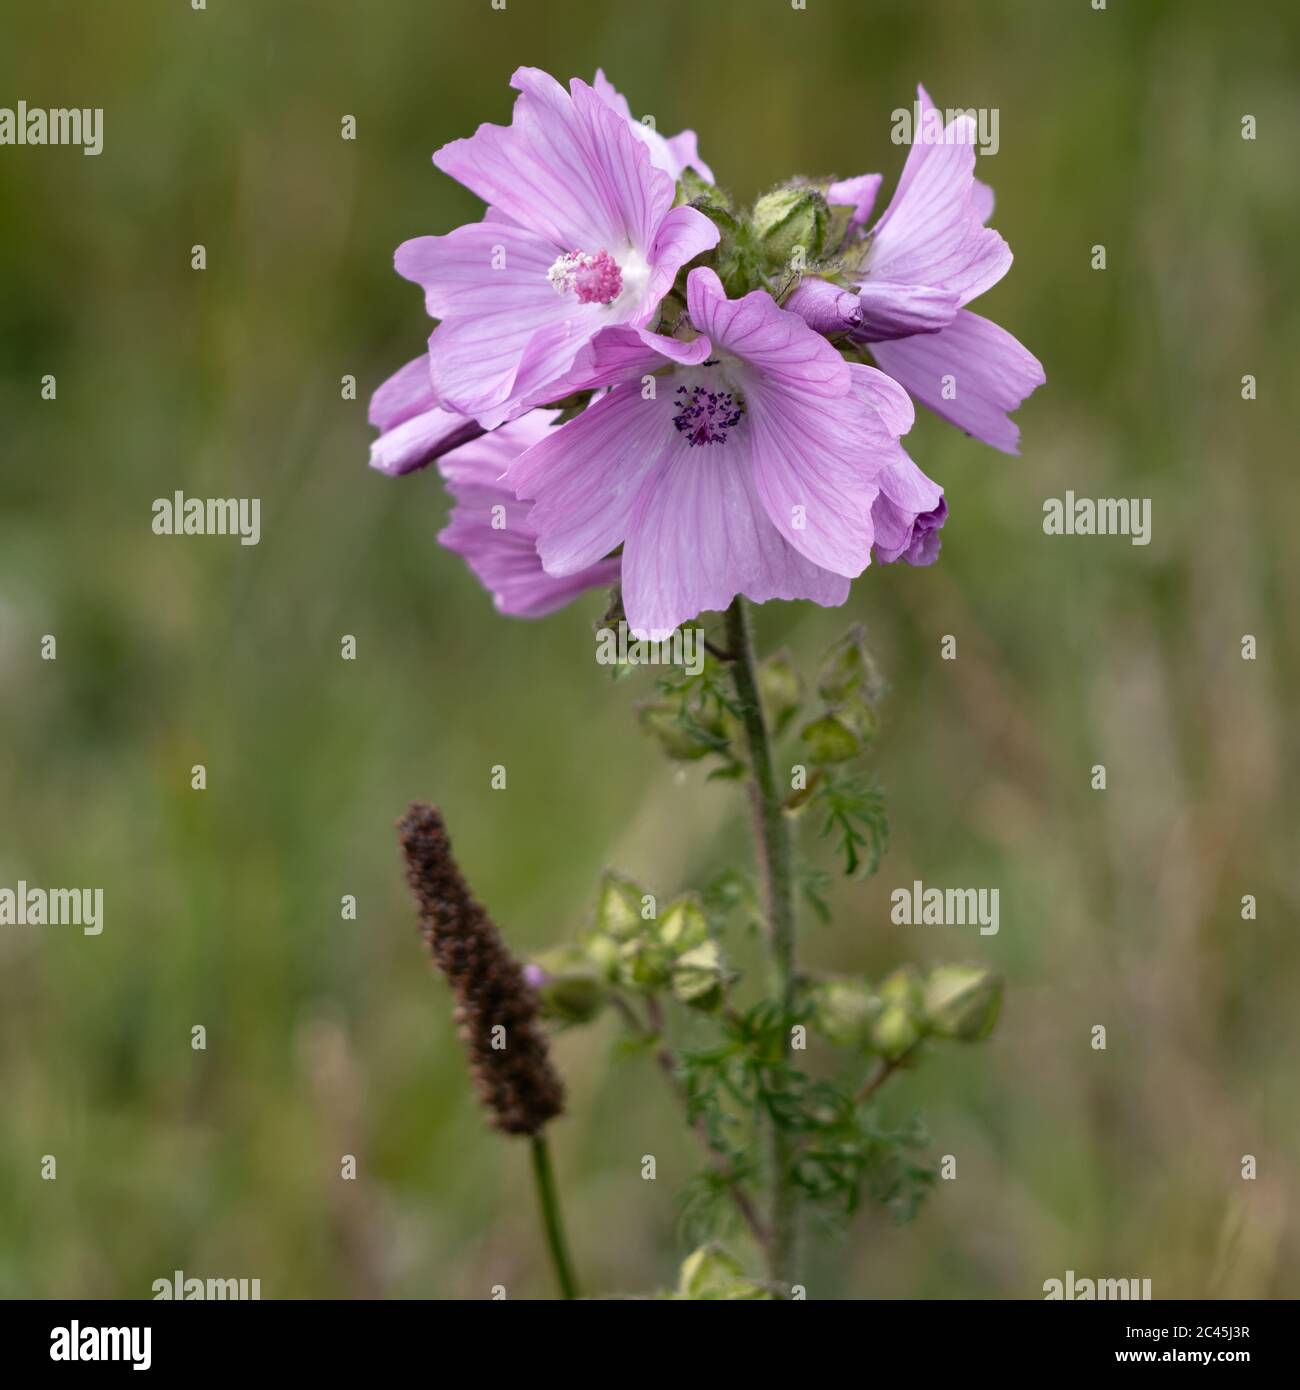 Wild Hollyhock (Alcea rosea) flowers. A Pink plant in the mallow family (Malvaceae) flowering in summertime. Stock Photo